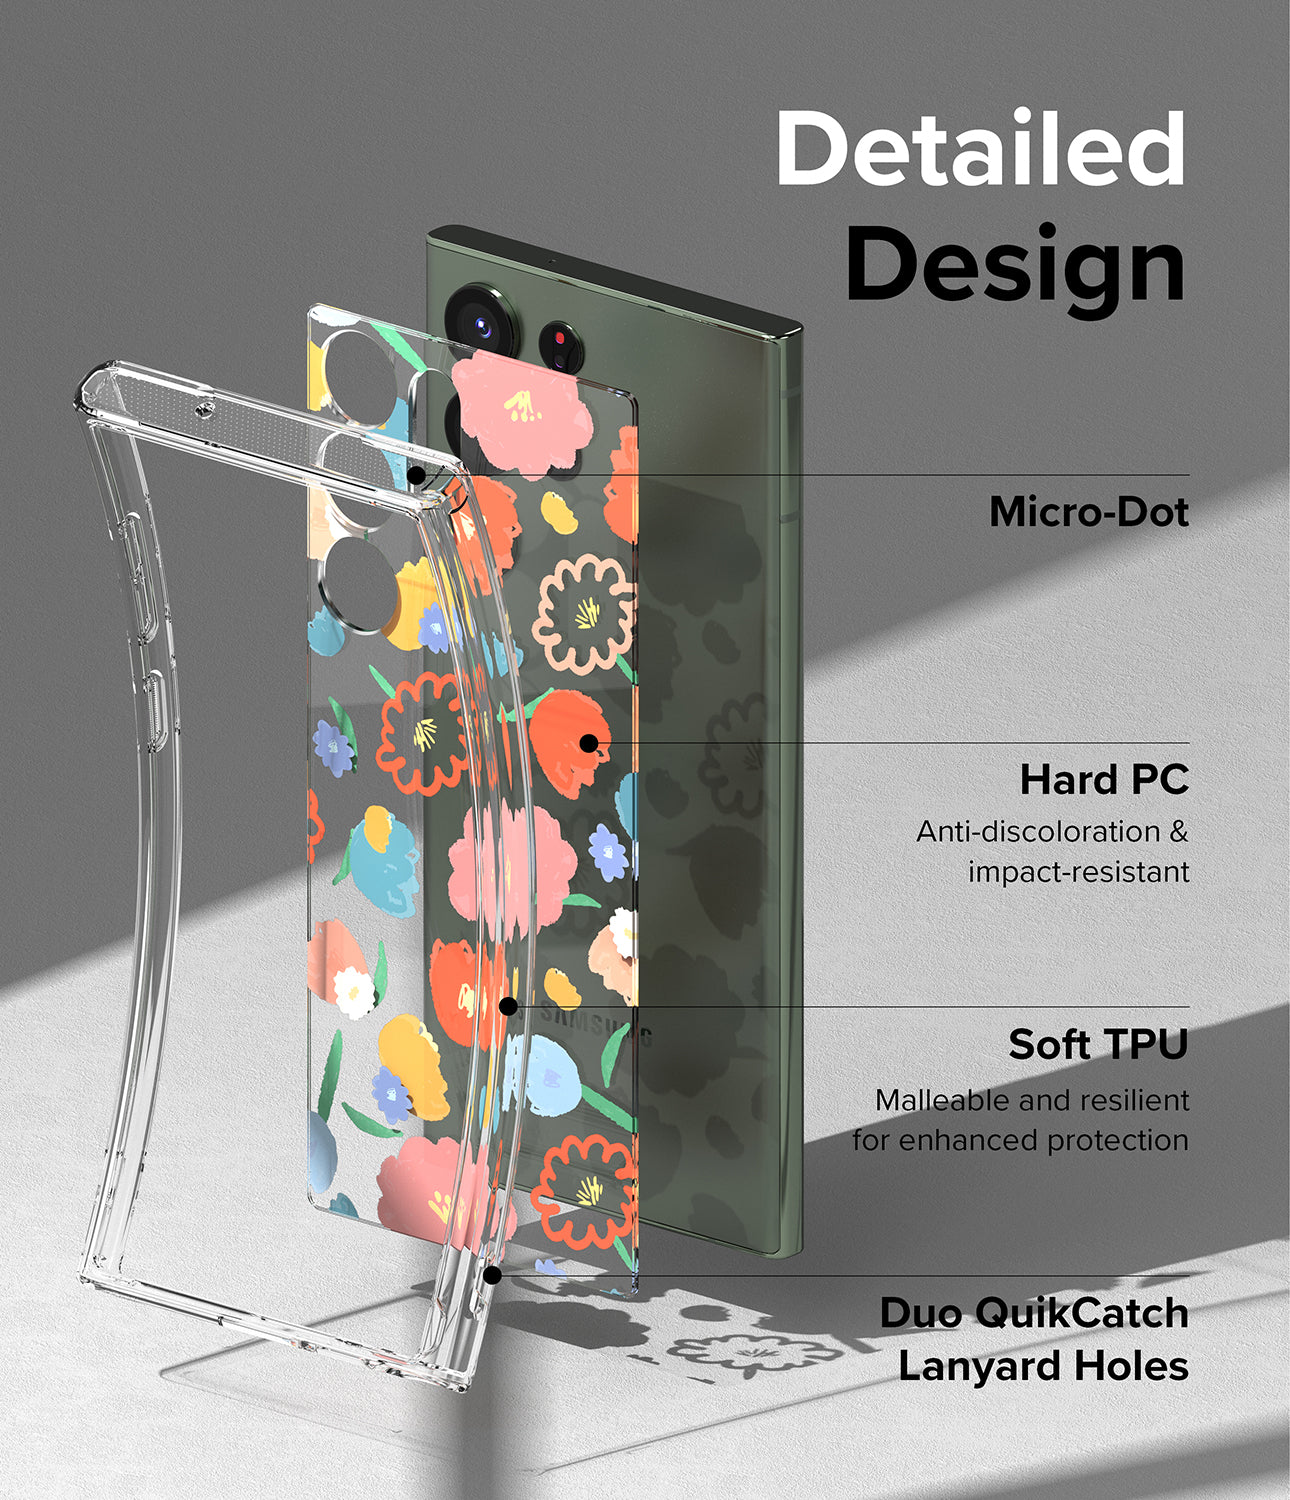 Galaxy S23 Ultra Case | Fusion Design Floral - Detailed Design. Micro-Dot. Anti-discoloration and impact-resistant with Hard PC. Malleable and resilient for enhanced protection with Soft TPU. Duo QuikCatch Lanyard Holes.